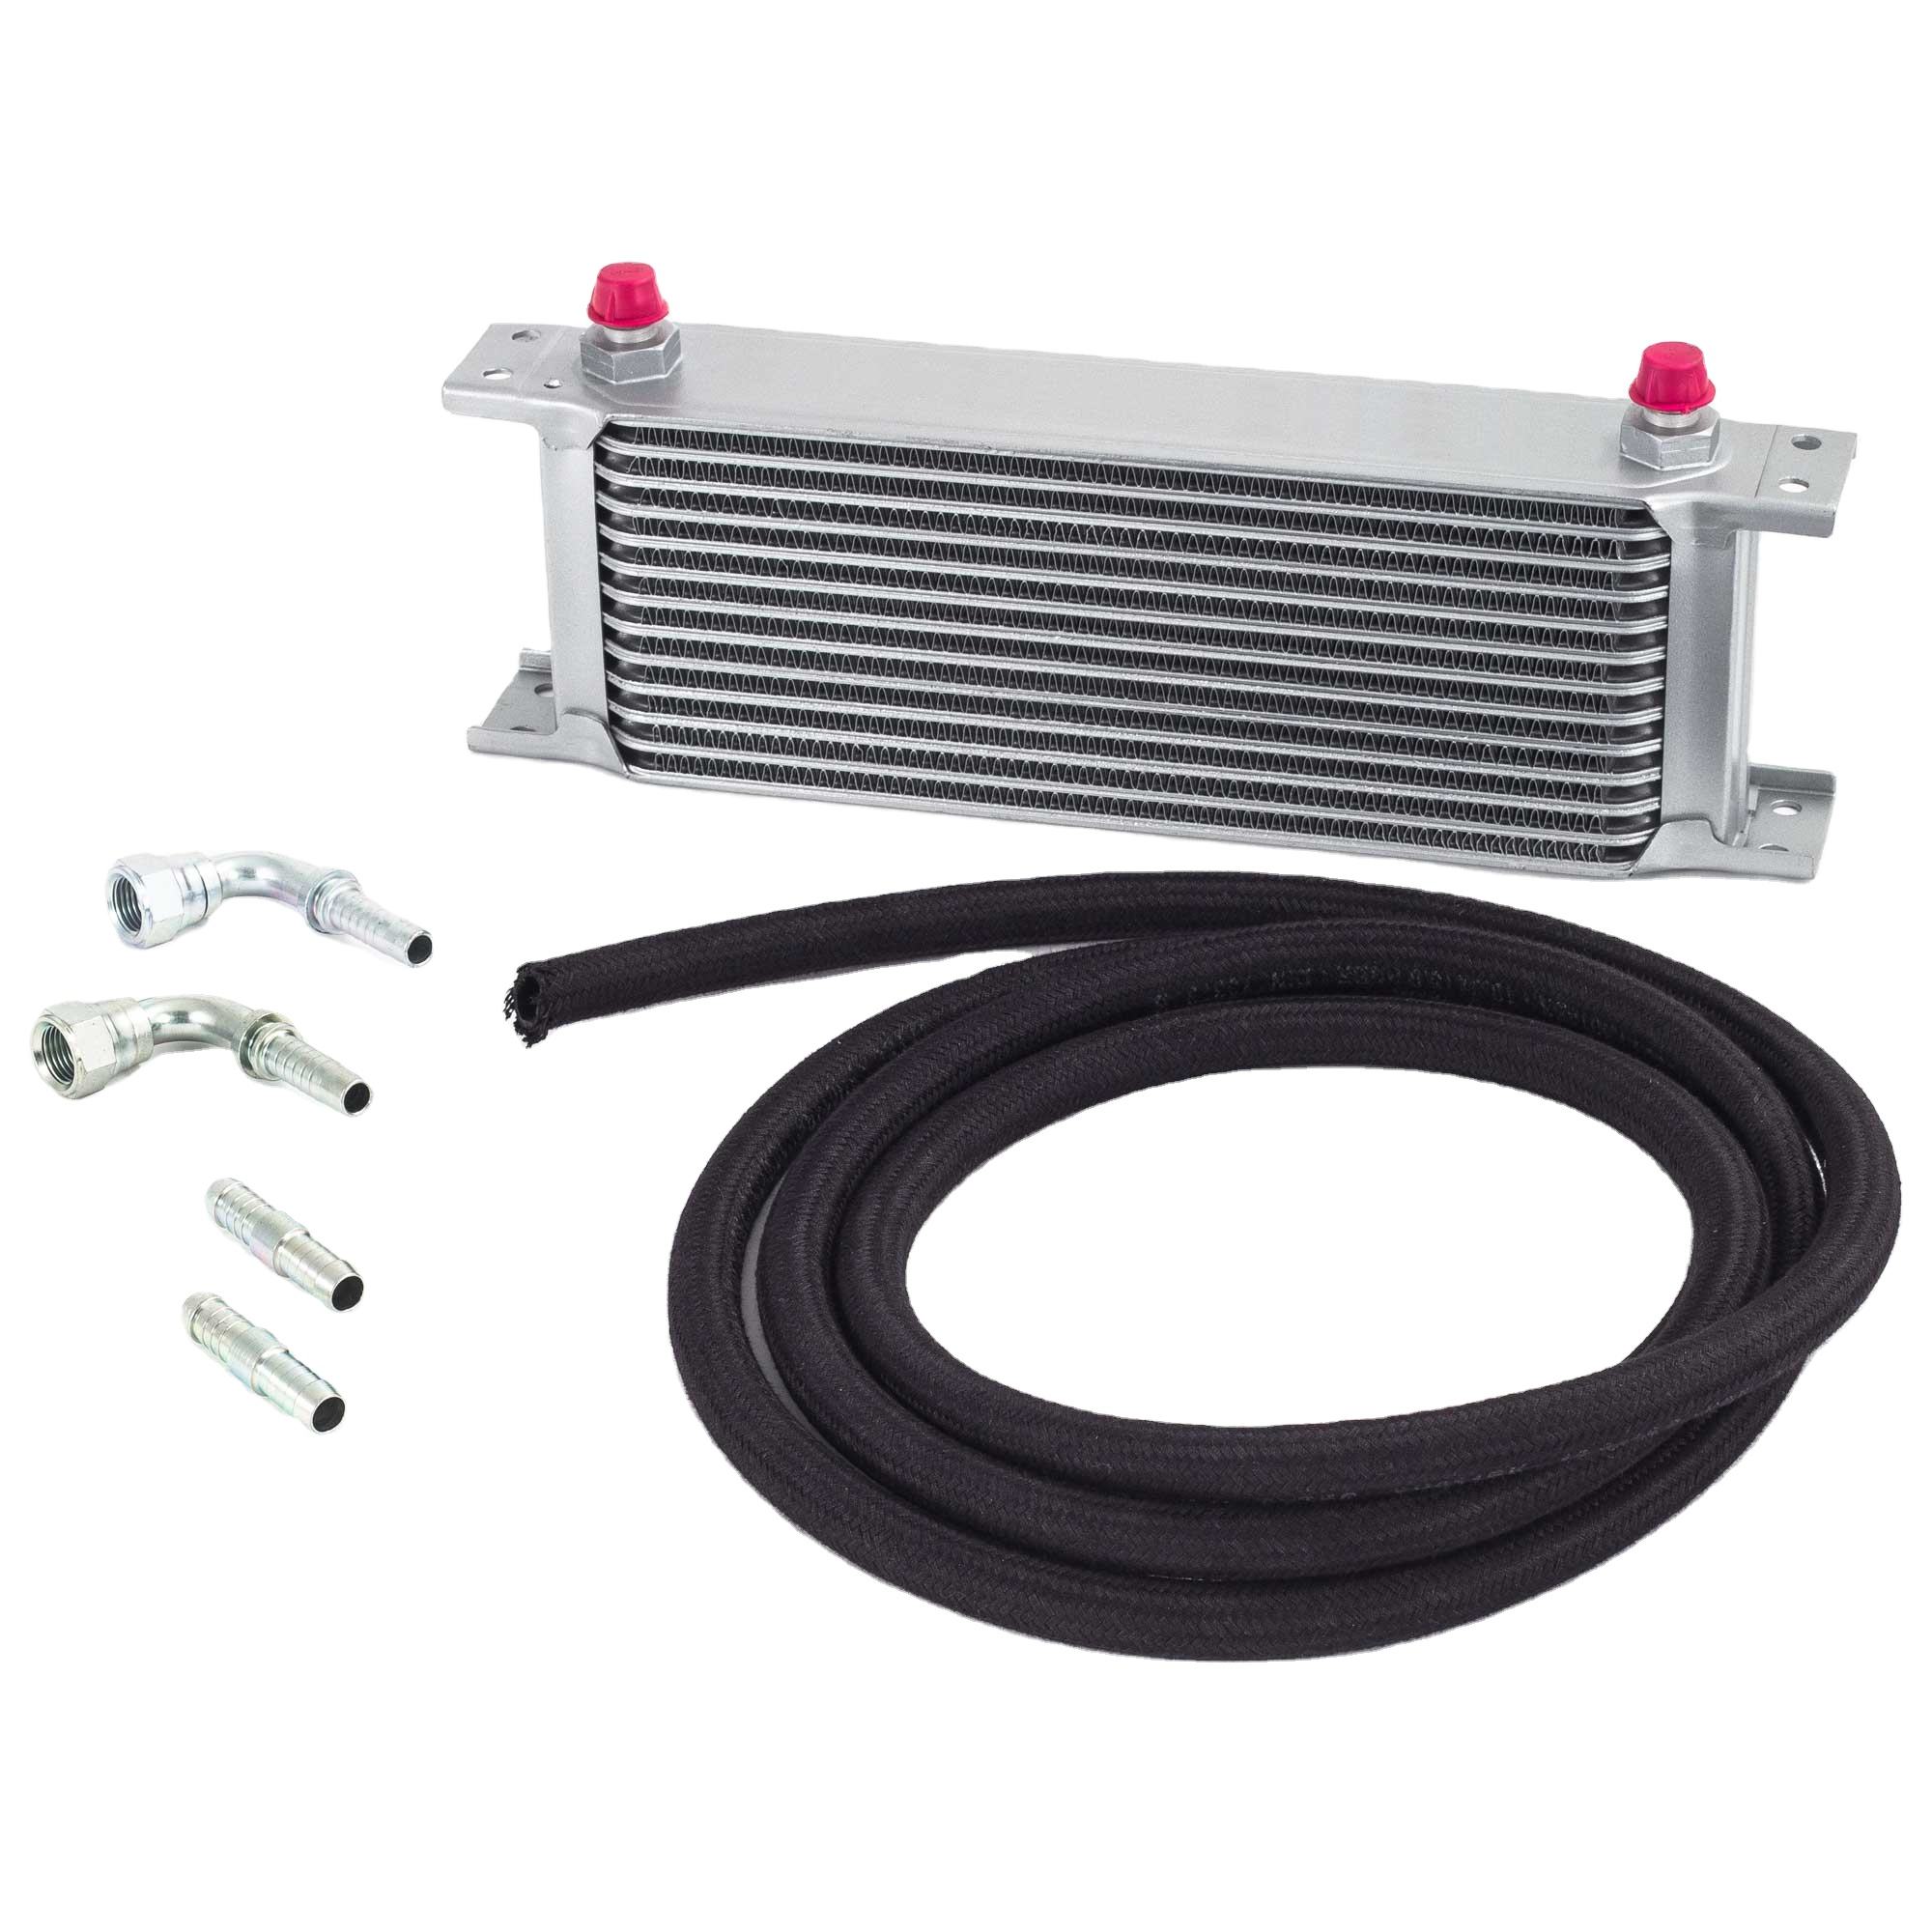 13 Row Rows AN10 Engine Transmission Oil Cooler Kit